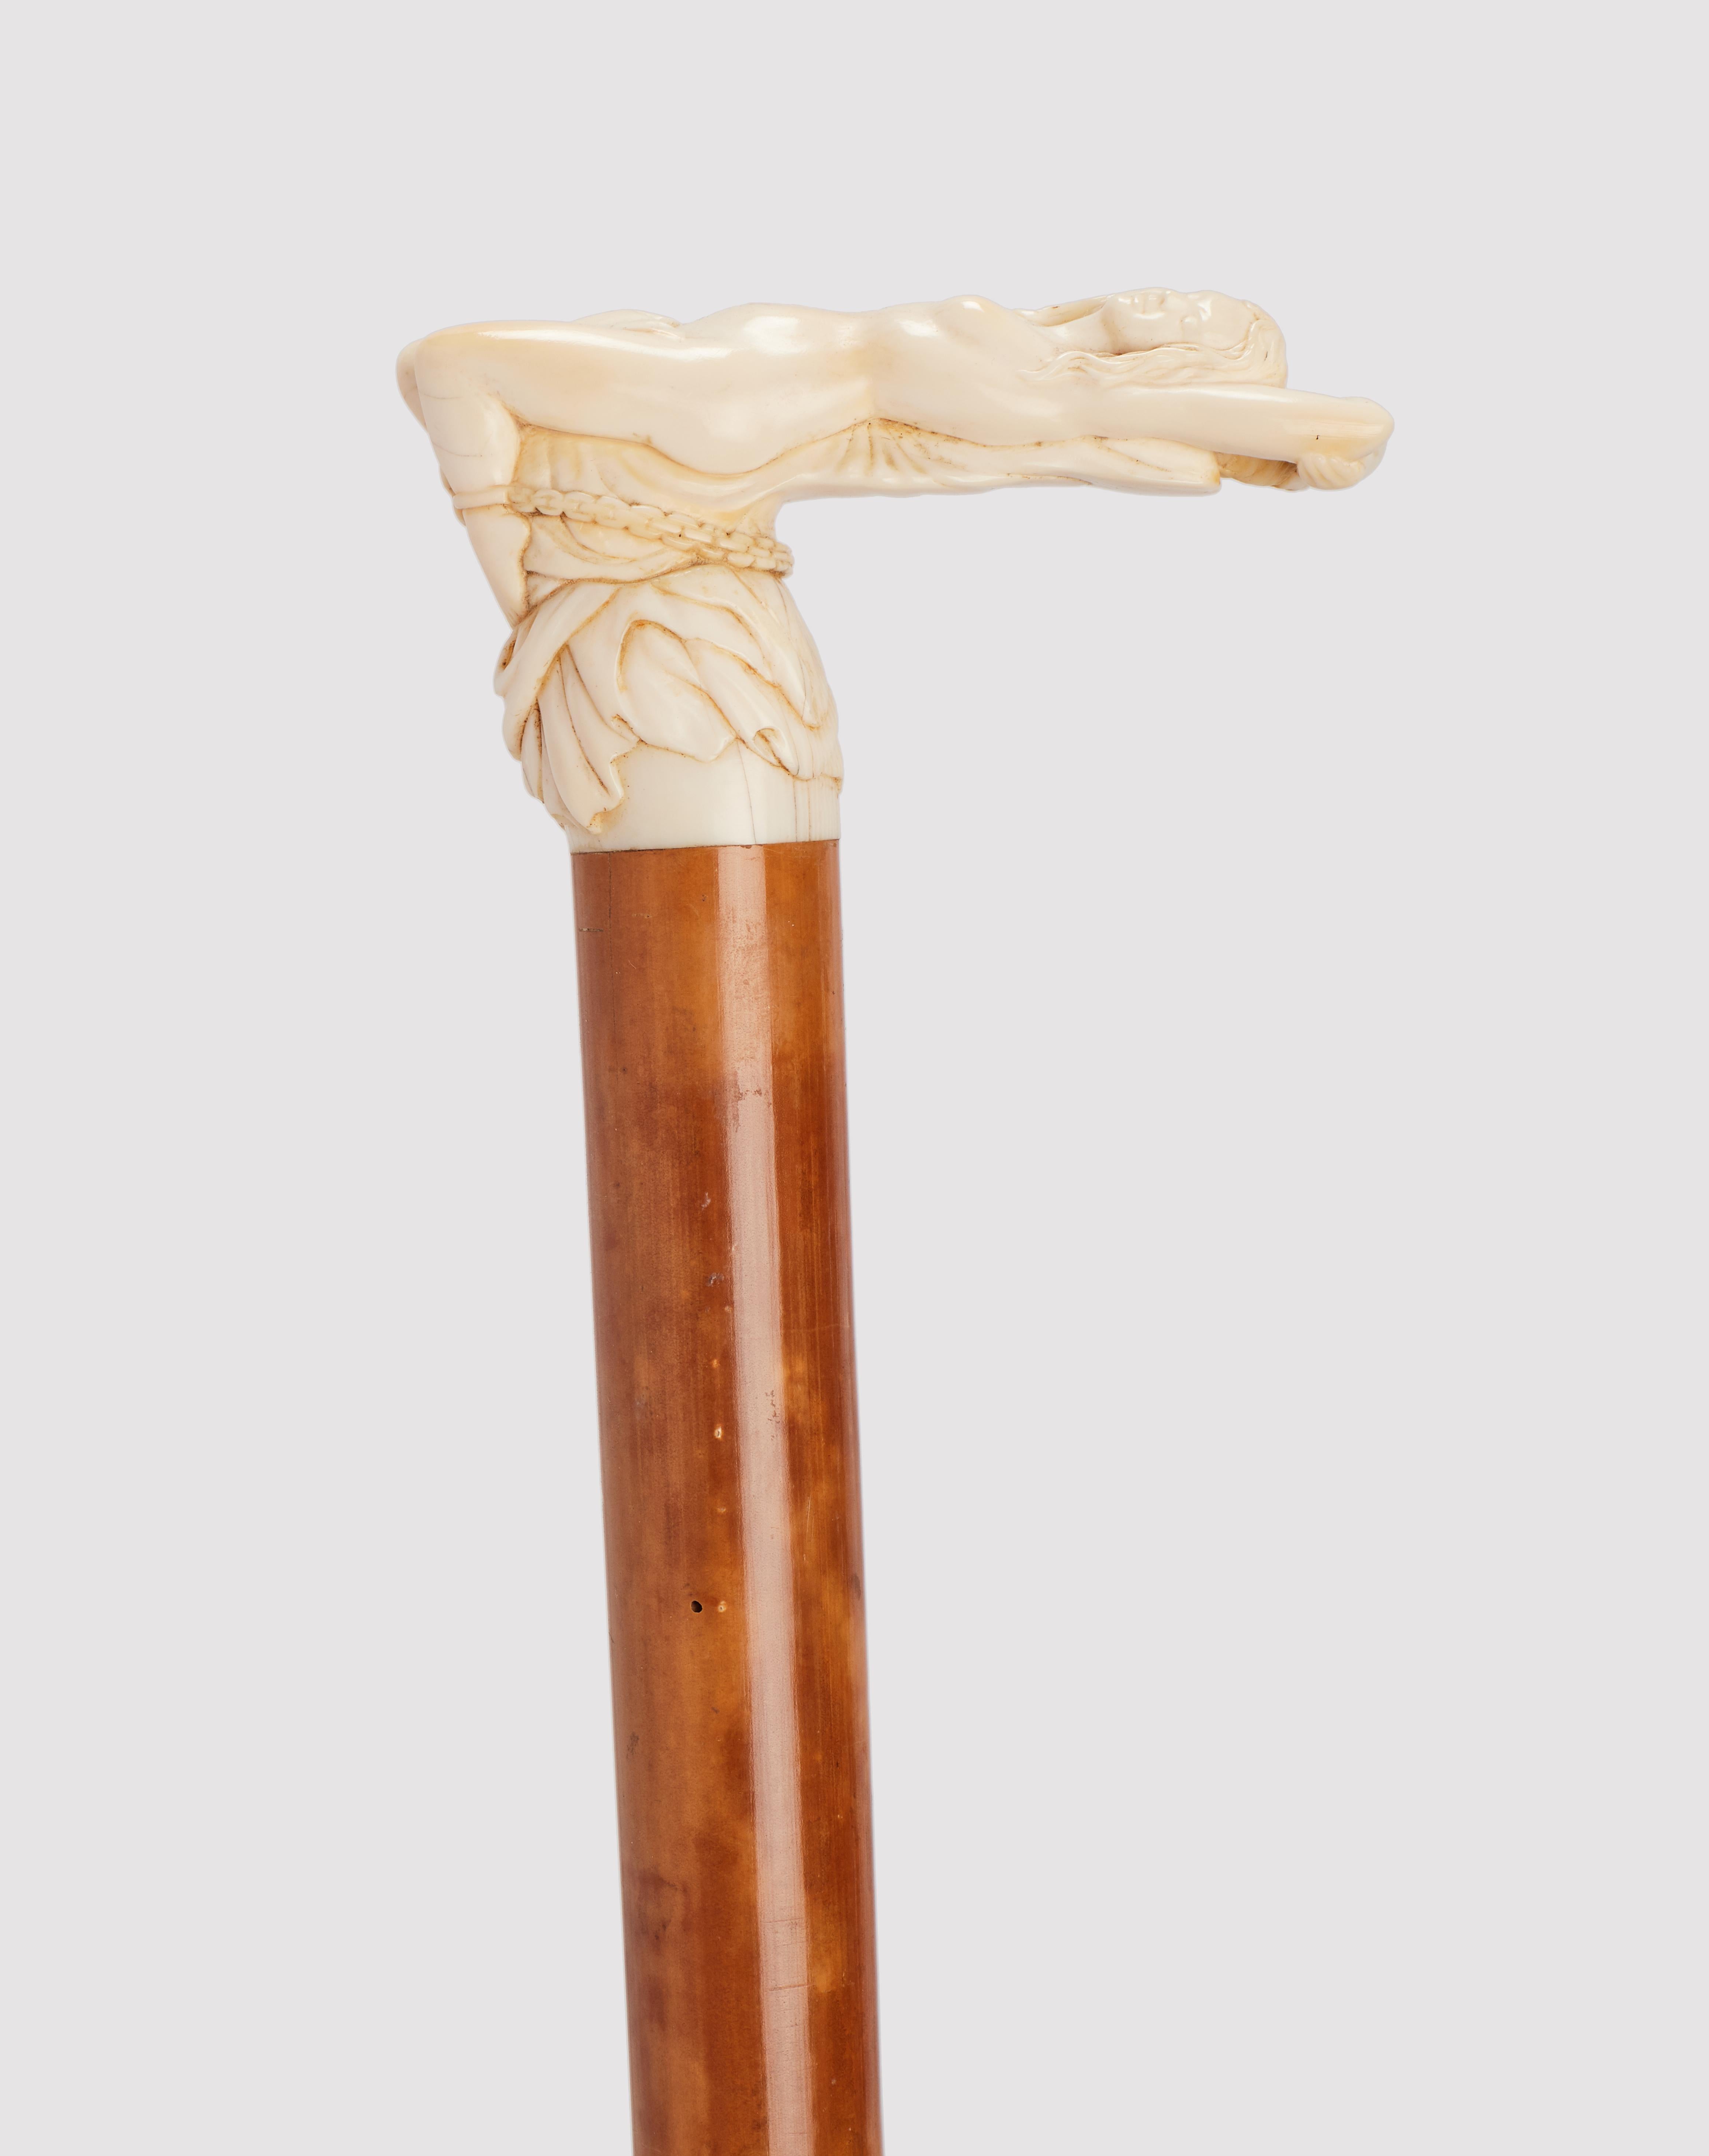 Walking stick: Ivory carved handle, it depicts the scene of the Greek mith of Andromeda chained to the rocks. L shaped handle. Malacca wooden shaft. Metal ferrule. England circa 1880. (SHIP TO EU ONLY)